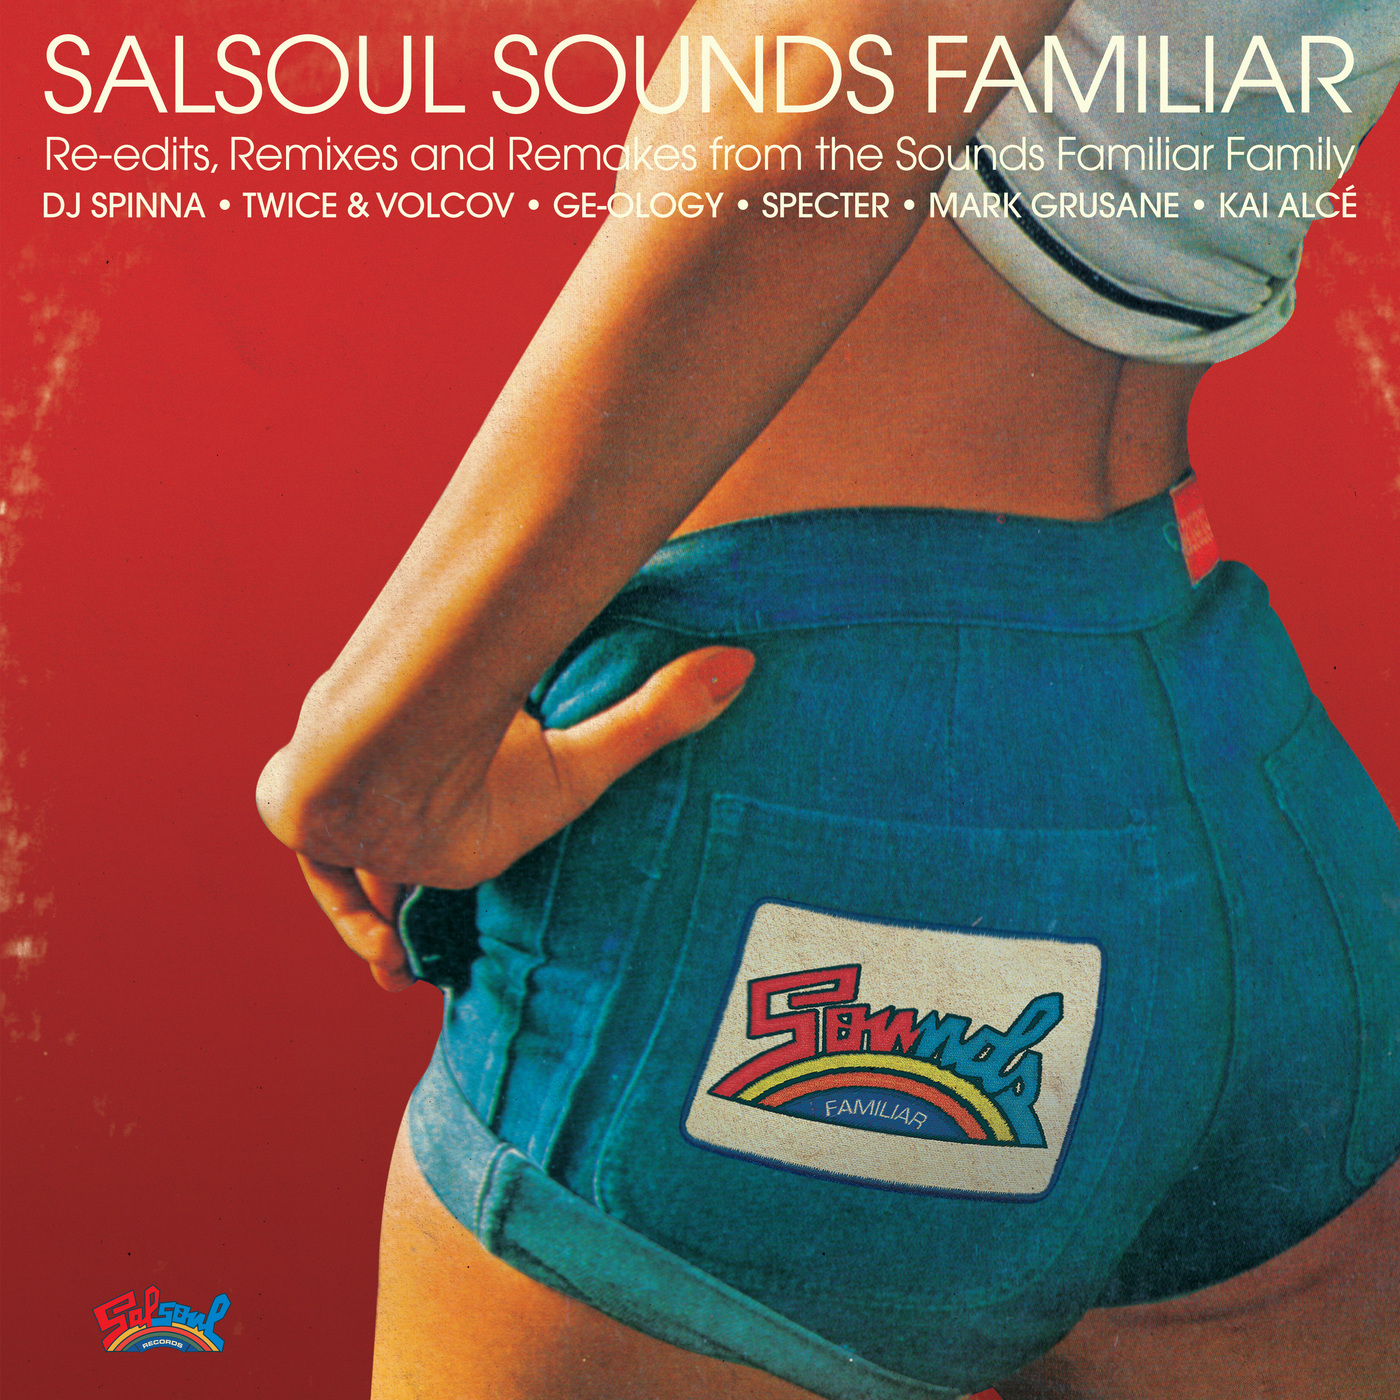 The Salsoul Orchestra - Chicago Bus Stop (Ooh, I Love It) (DJ Spinna ReFreak) / Salsoul Records